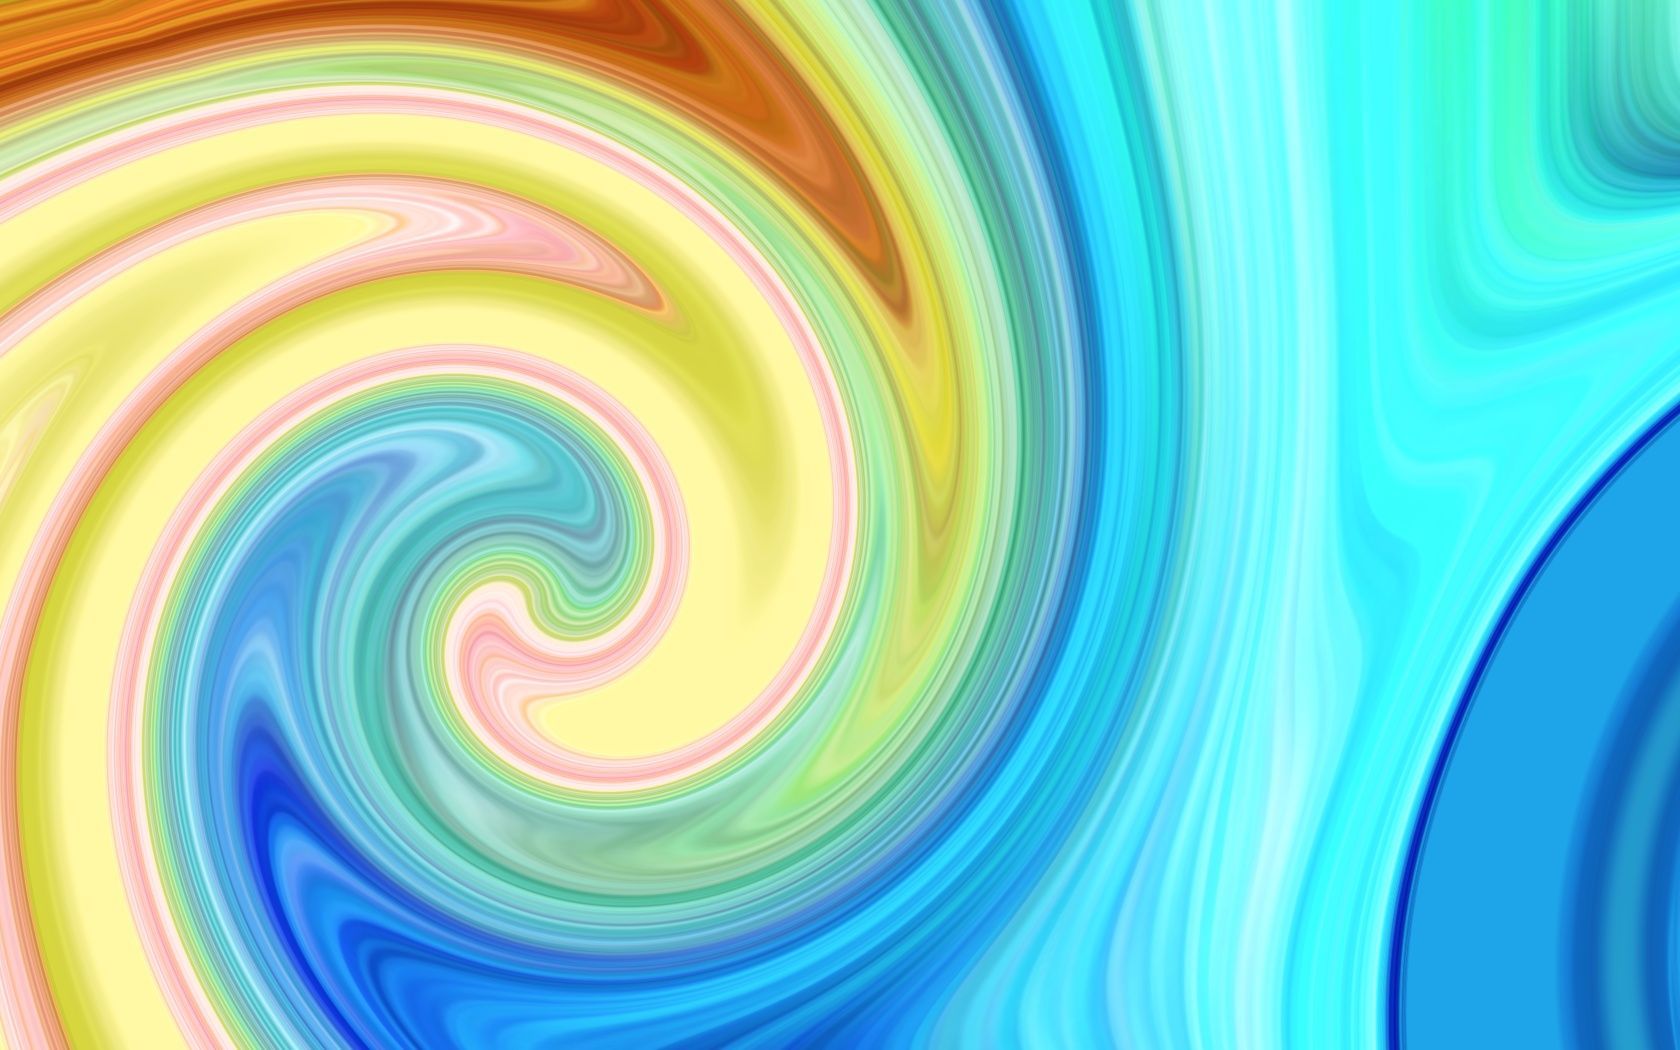 Abstract Swirl Wallpaper Free Abstract Swirl Background